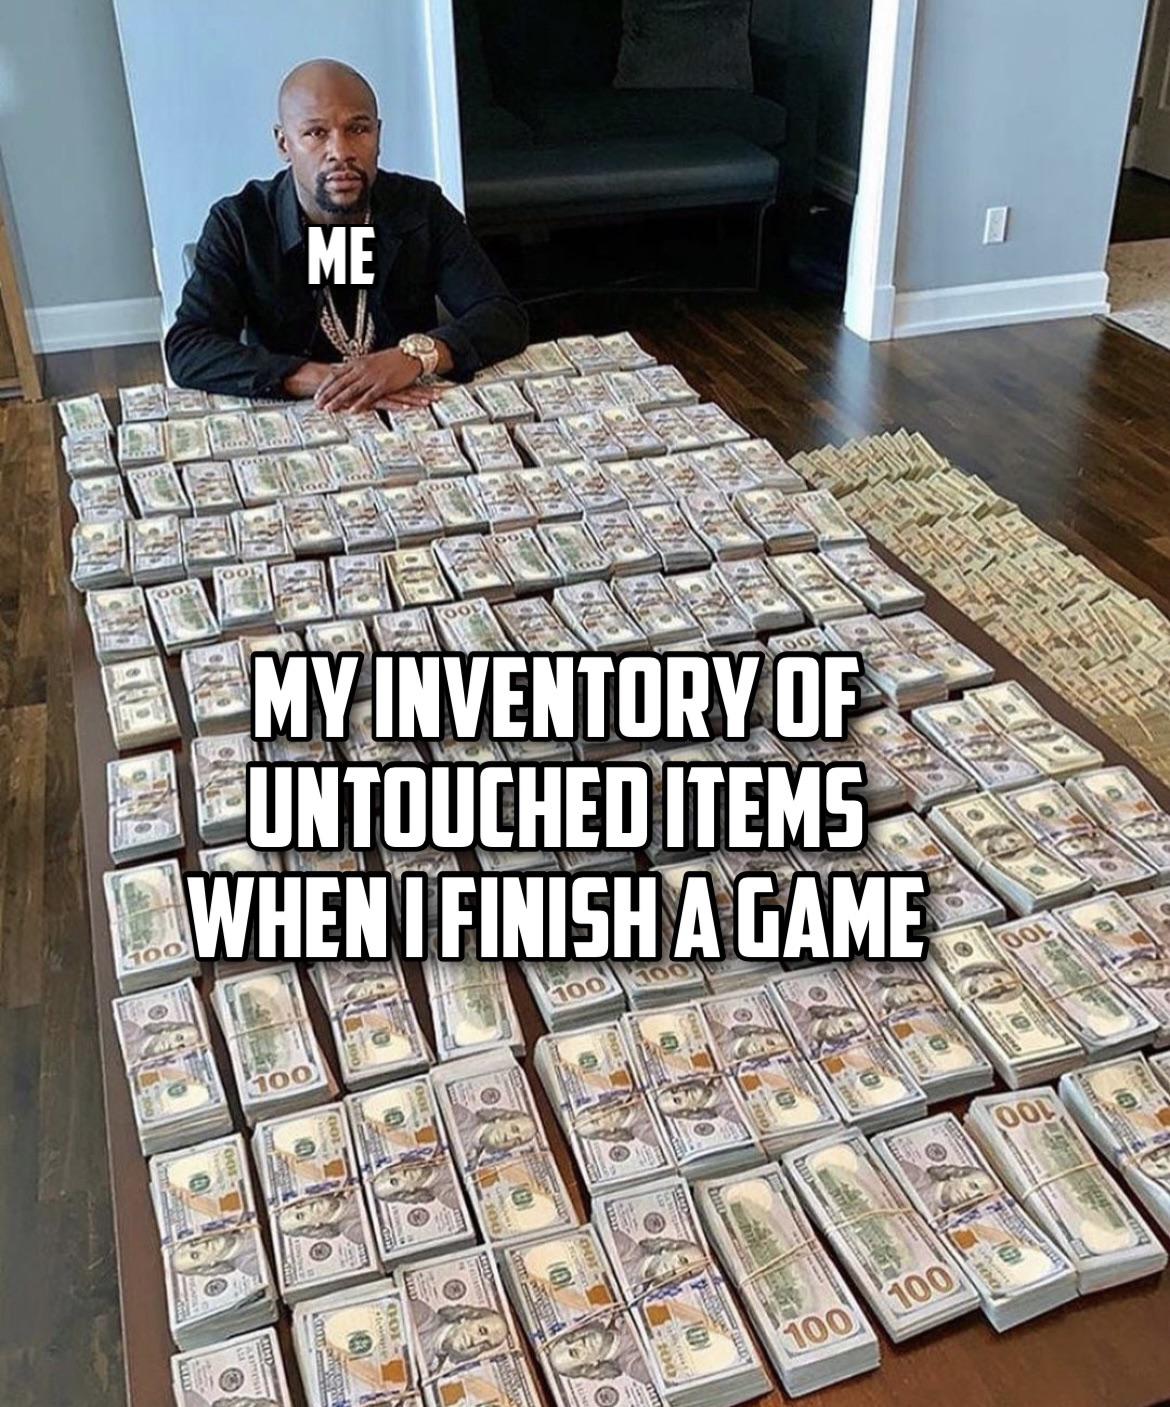 mayweather money - Me My Inventory Of Untouched Items When I Finish A Game 100 100 100 100 8 100 100 100 Ool Ool despre al Ken Flag Y 100 100